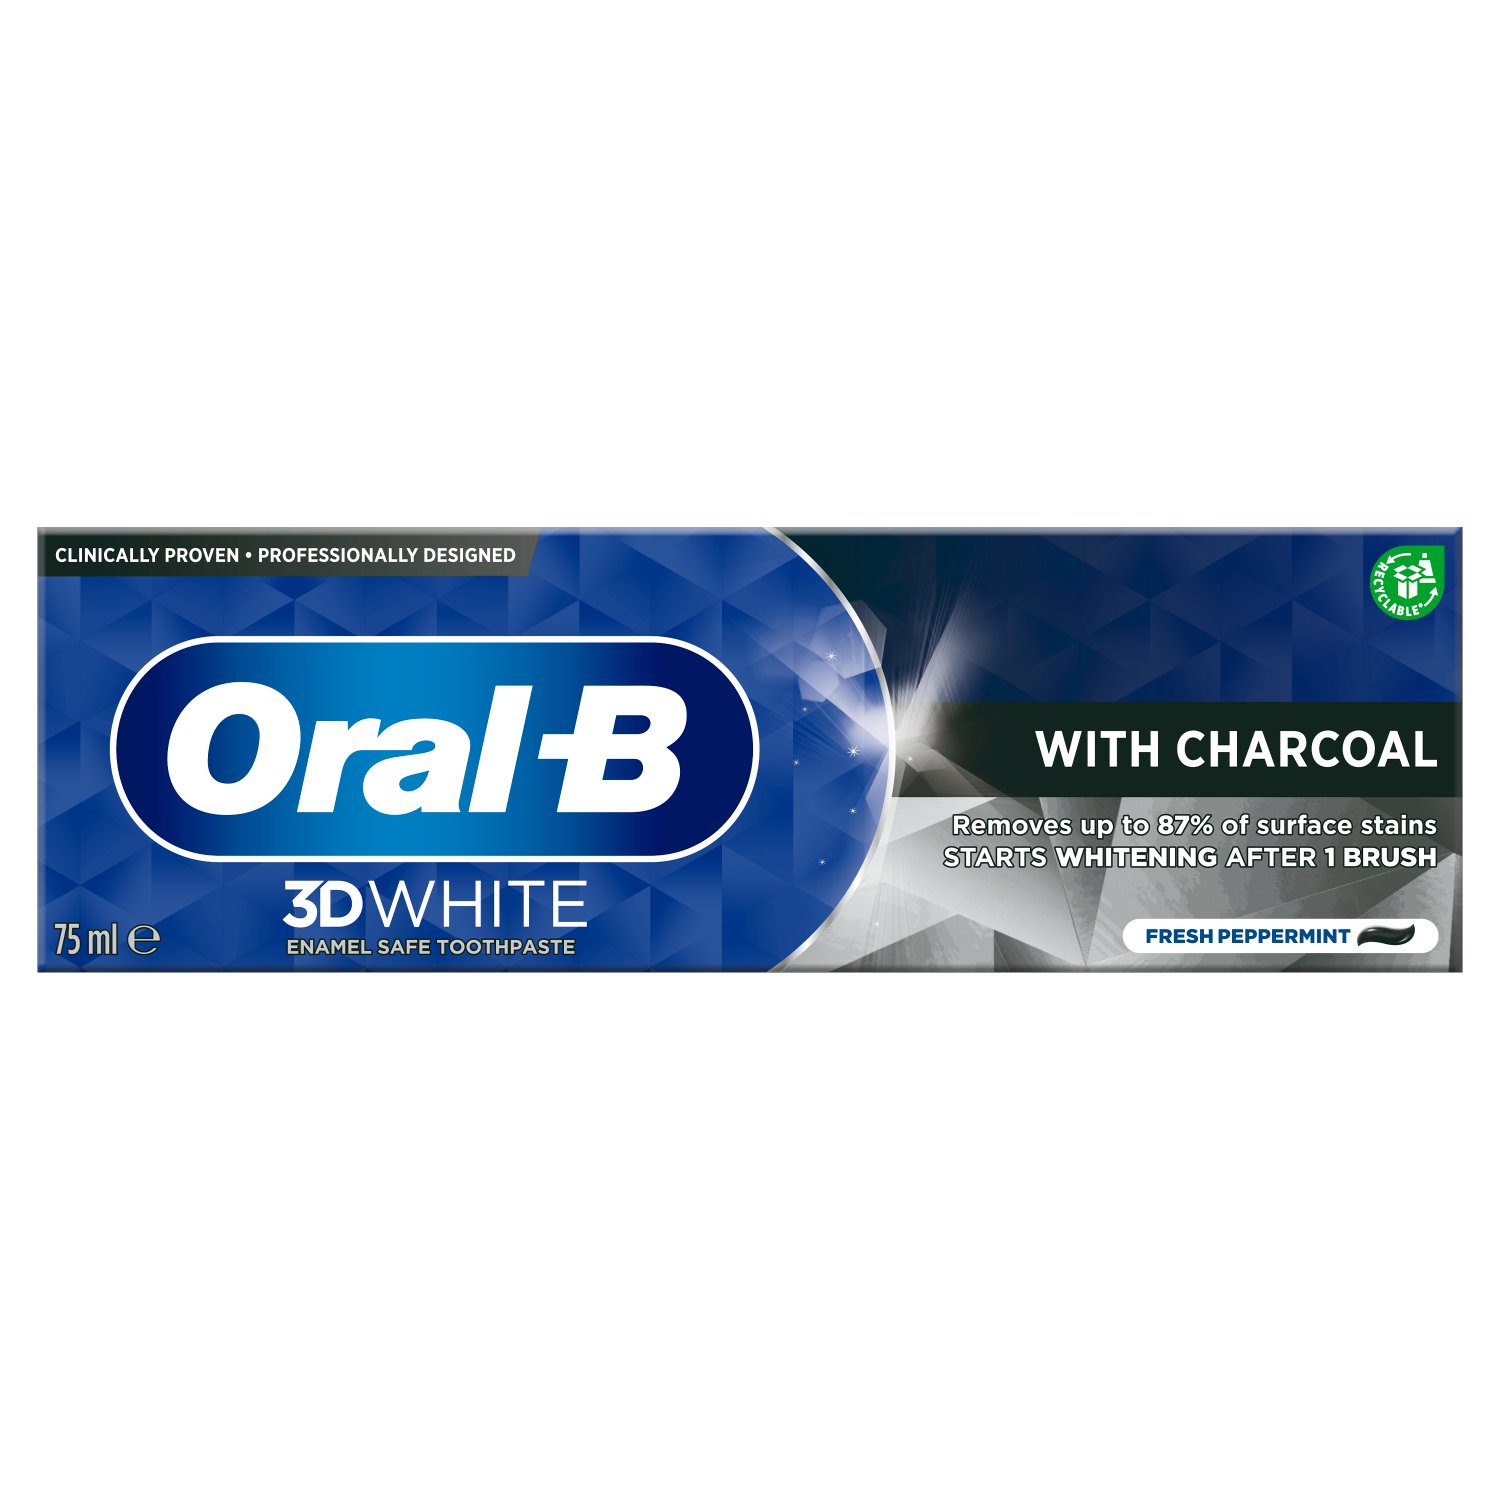 Oral B 3D White Charcoal Toothpaste (75 ml)